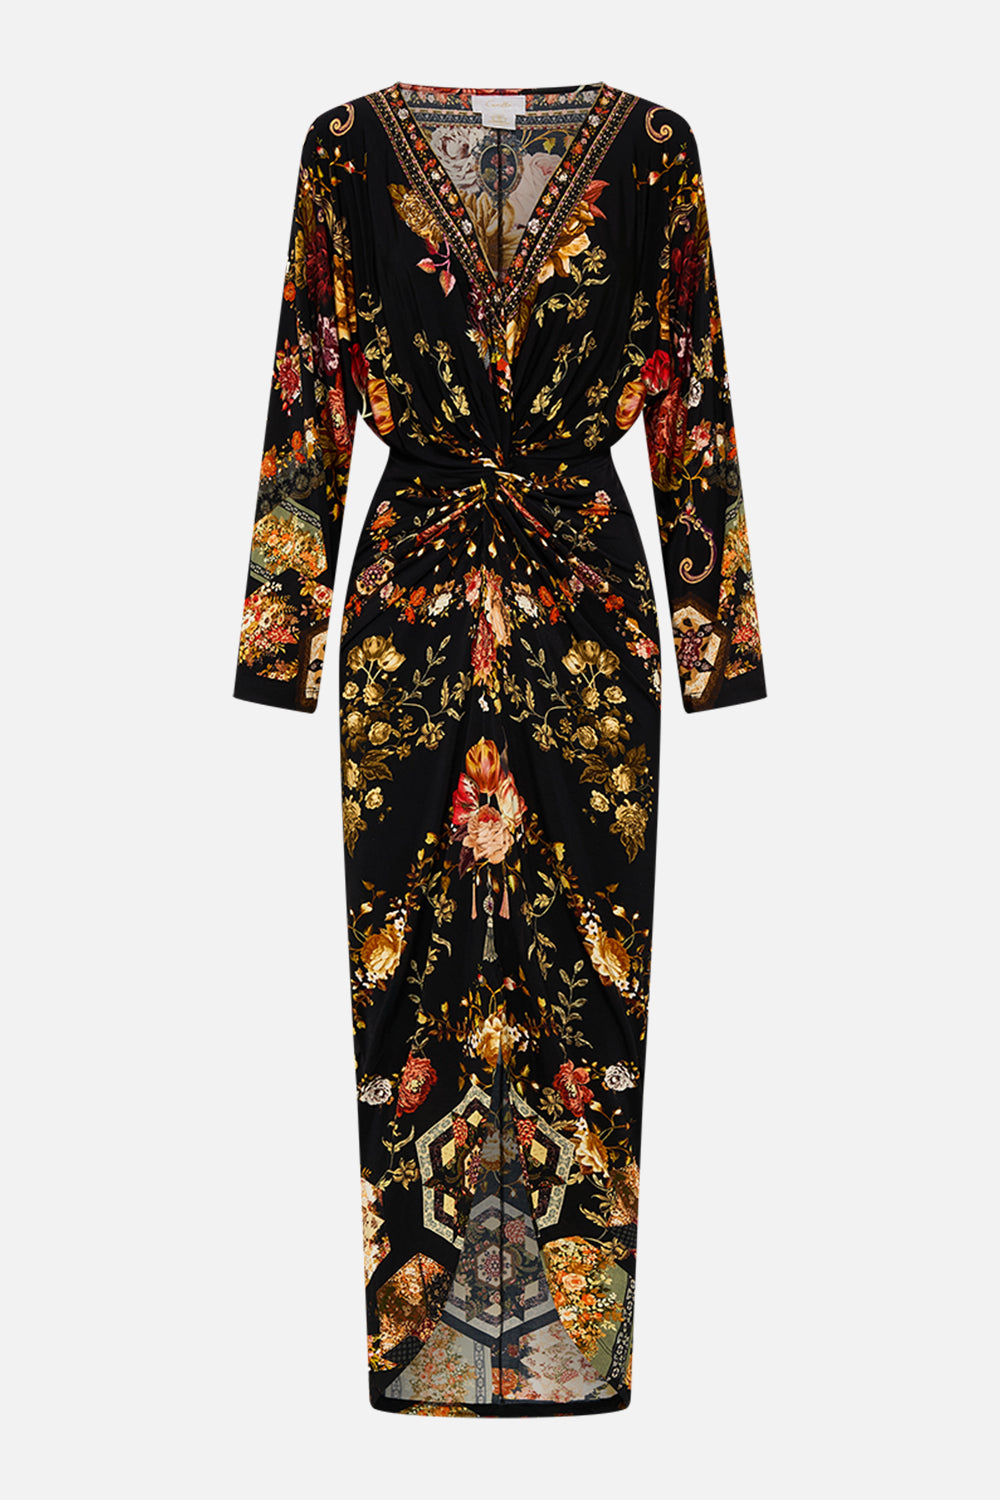 CAMILLA multicolor long split-front twist dress in Stitched In Time print.